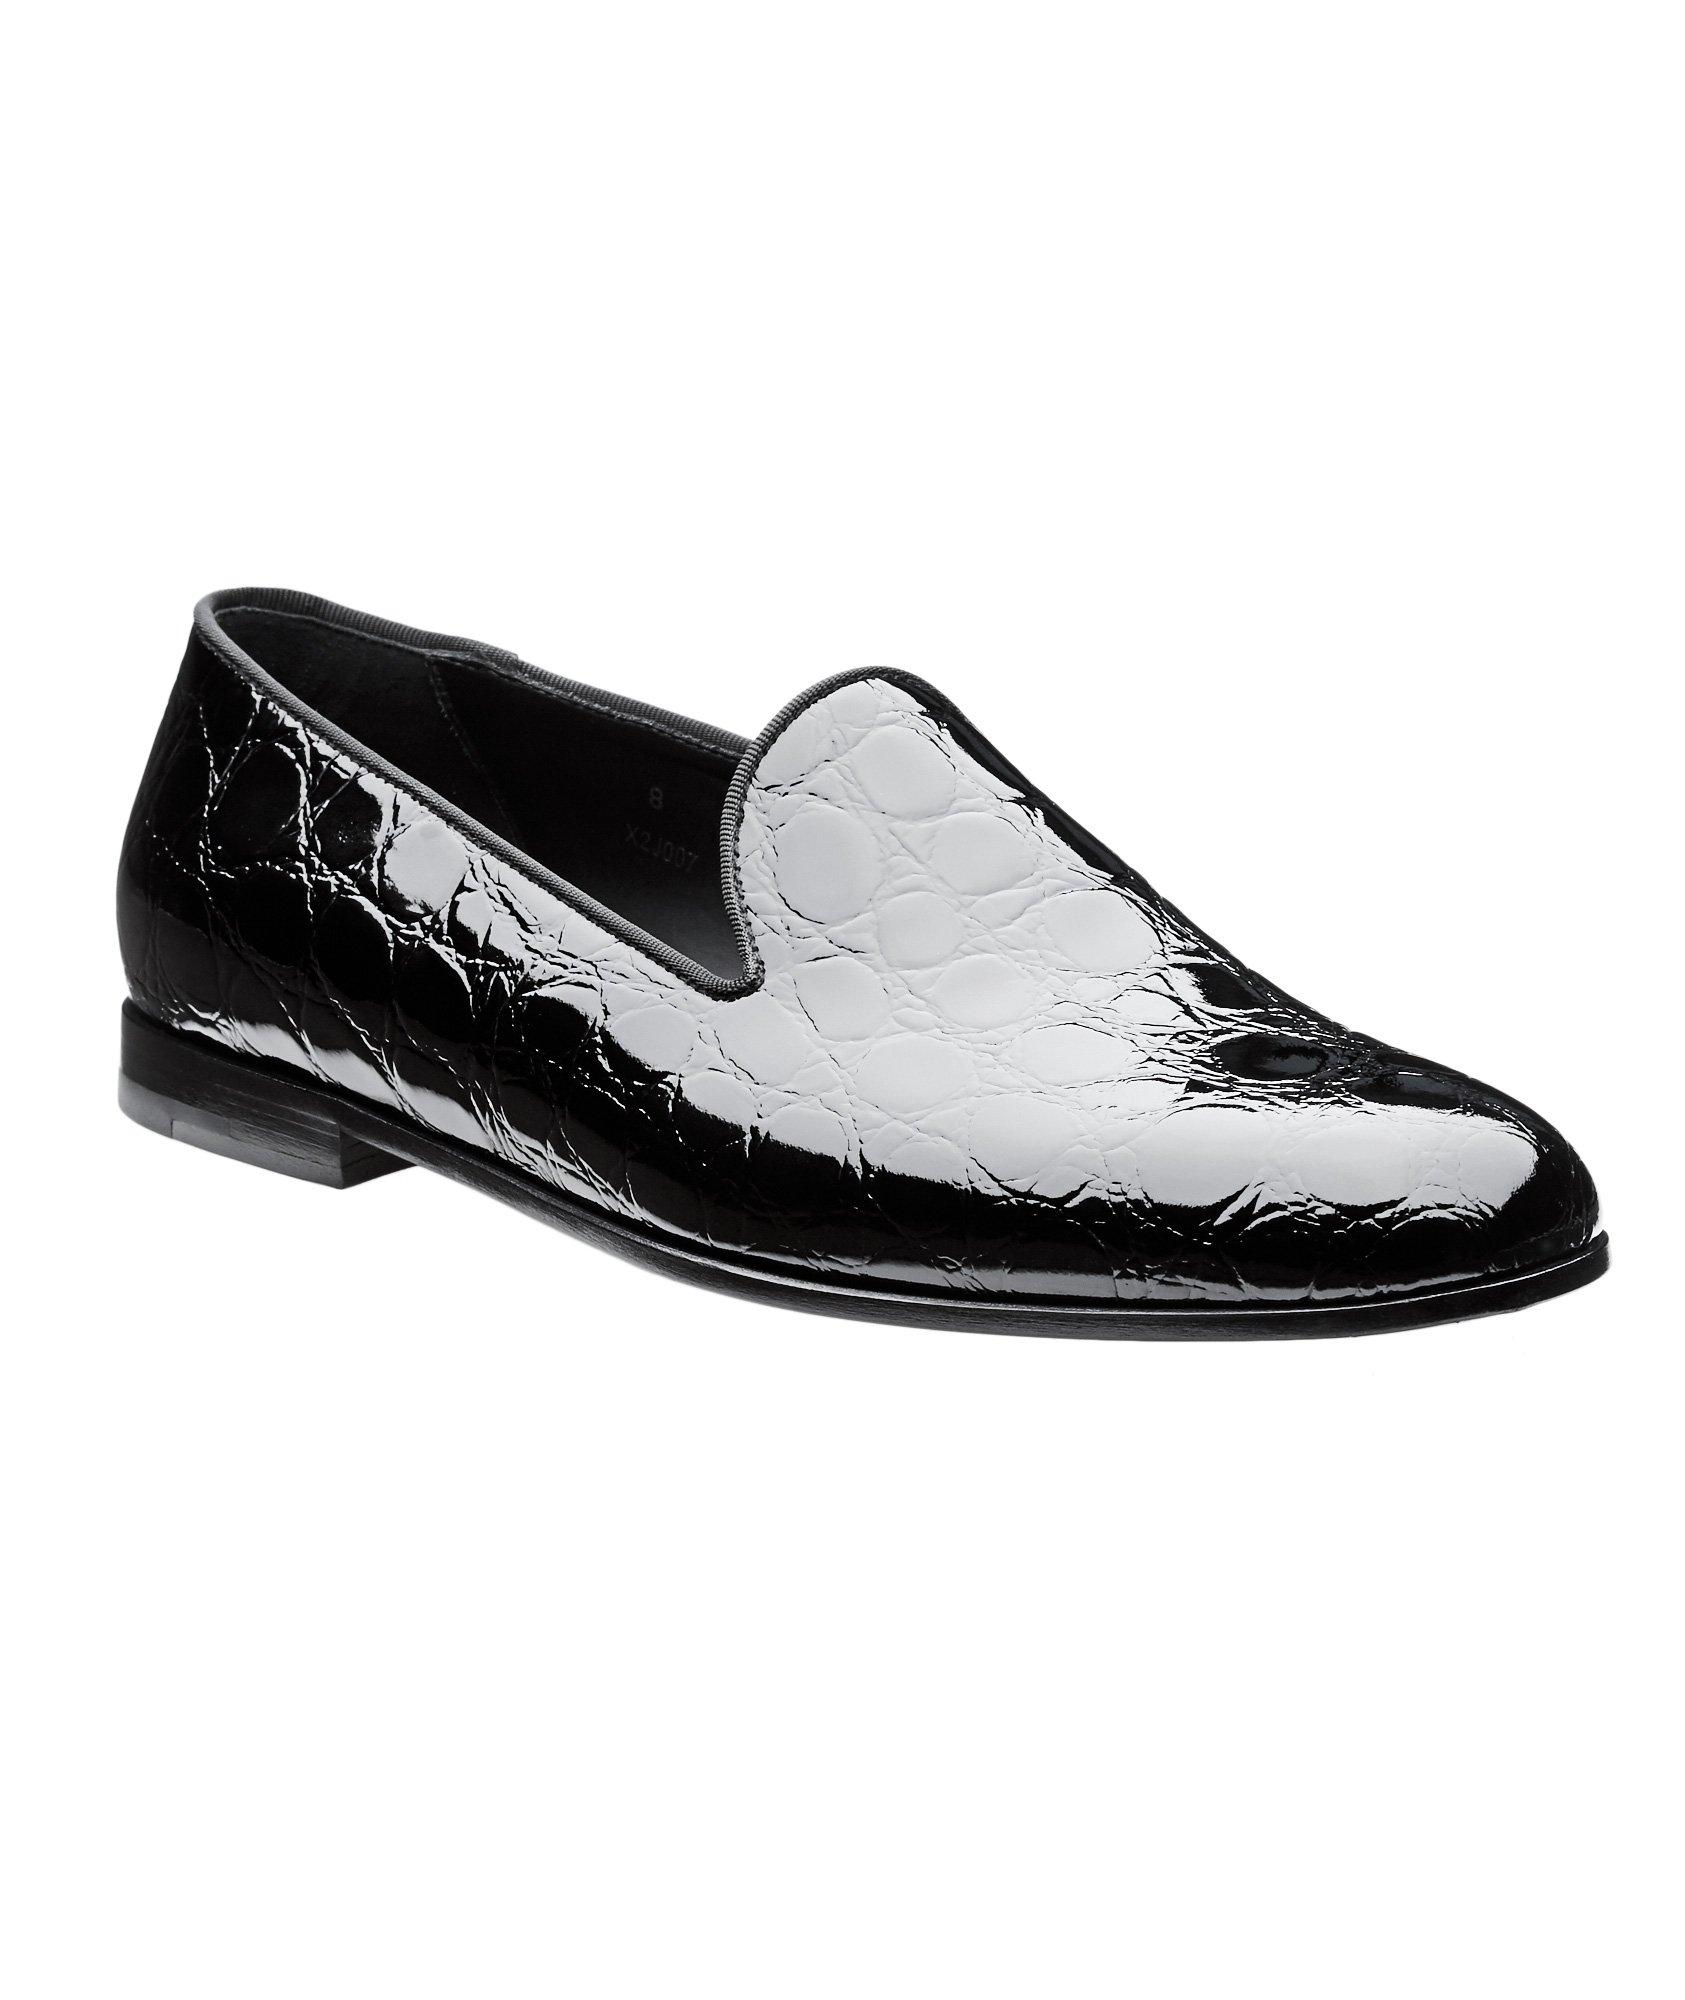 Patent Leather Loafers image 0